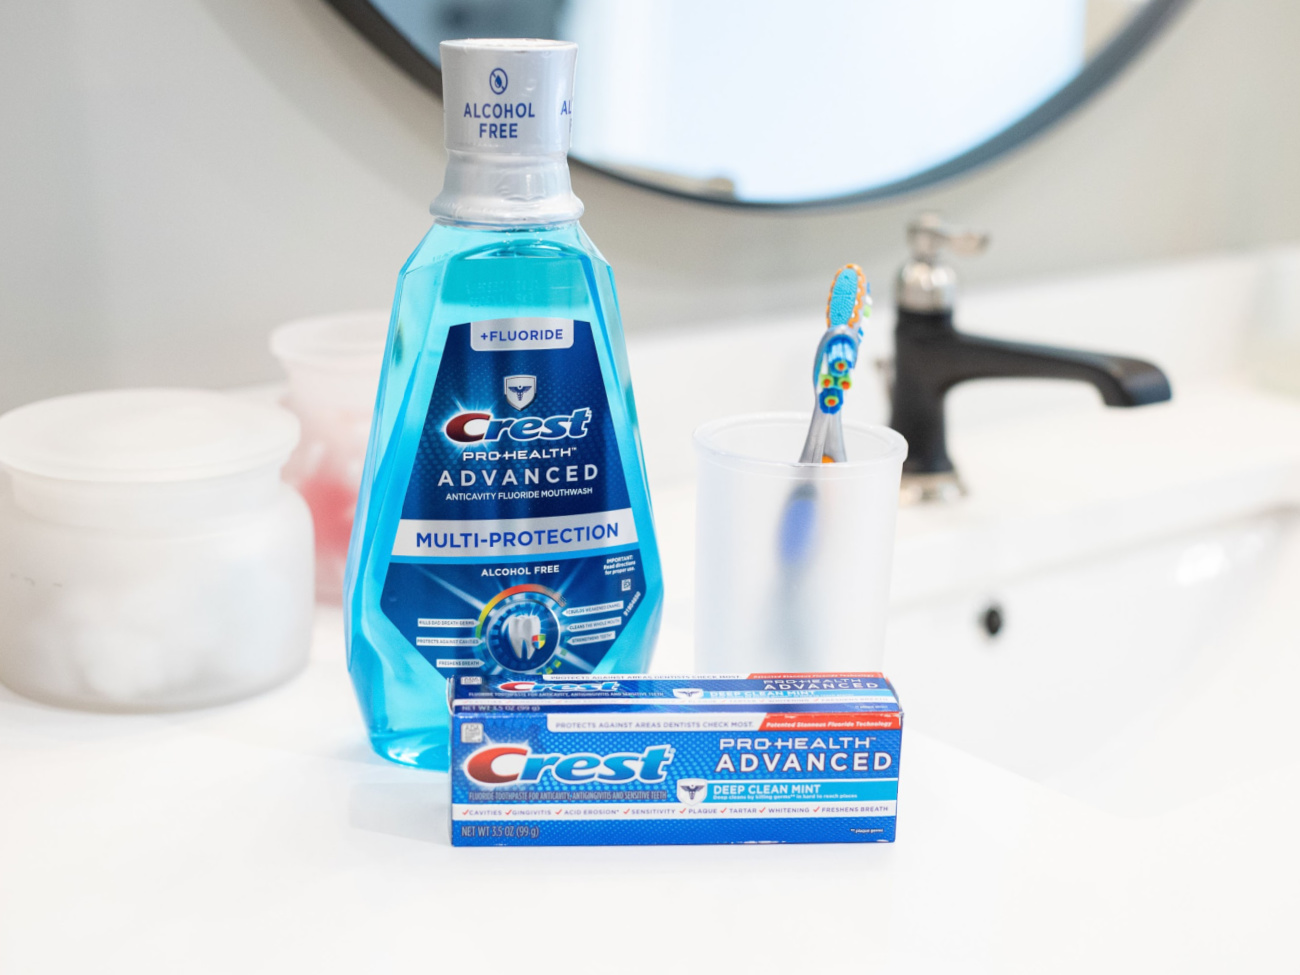 Crest Pro-Health Toothpaste As Low As $1.25 At Publix